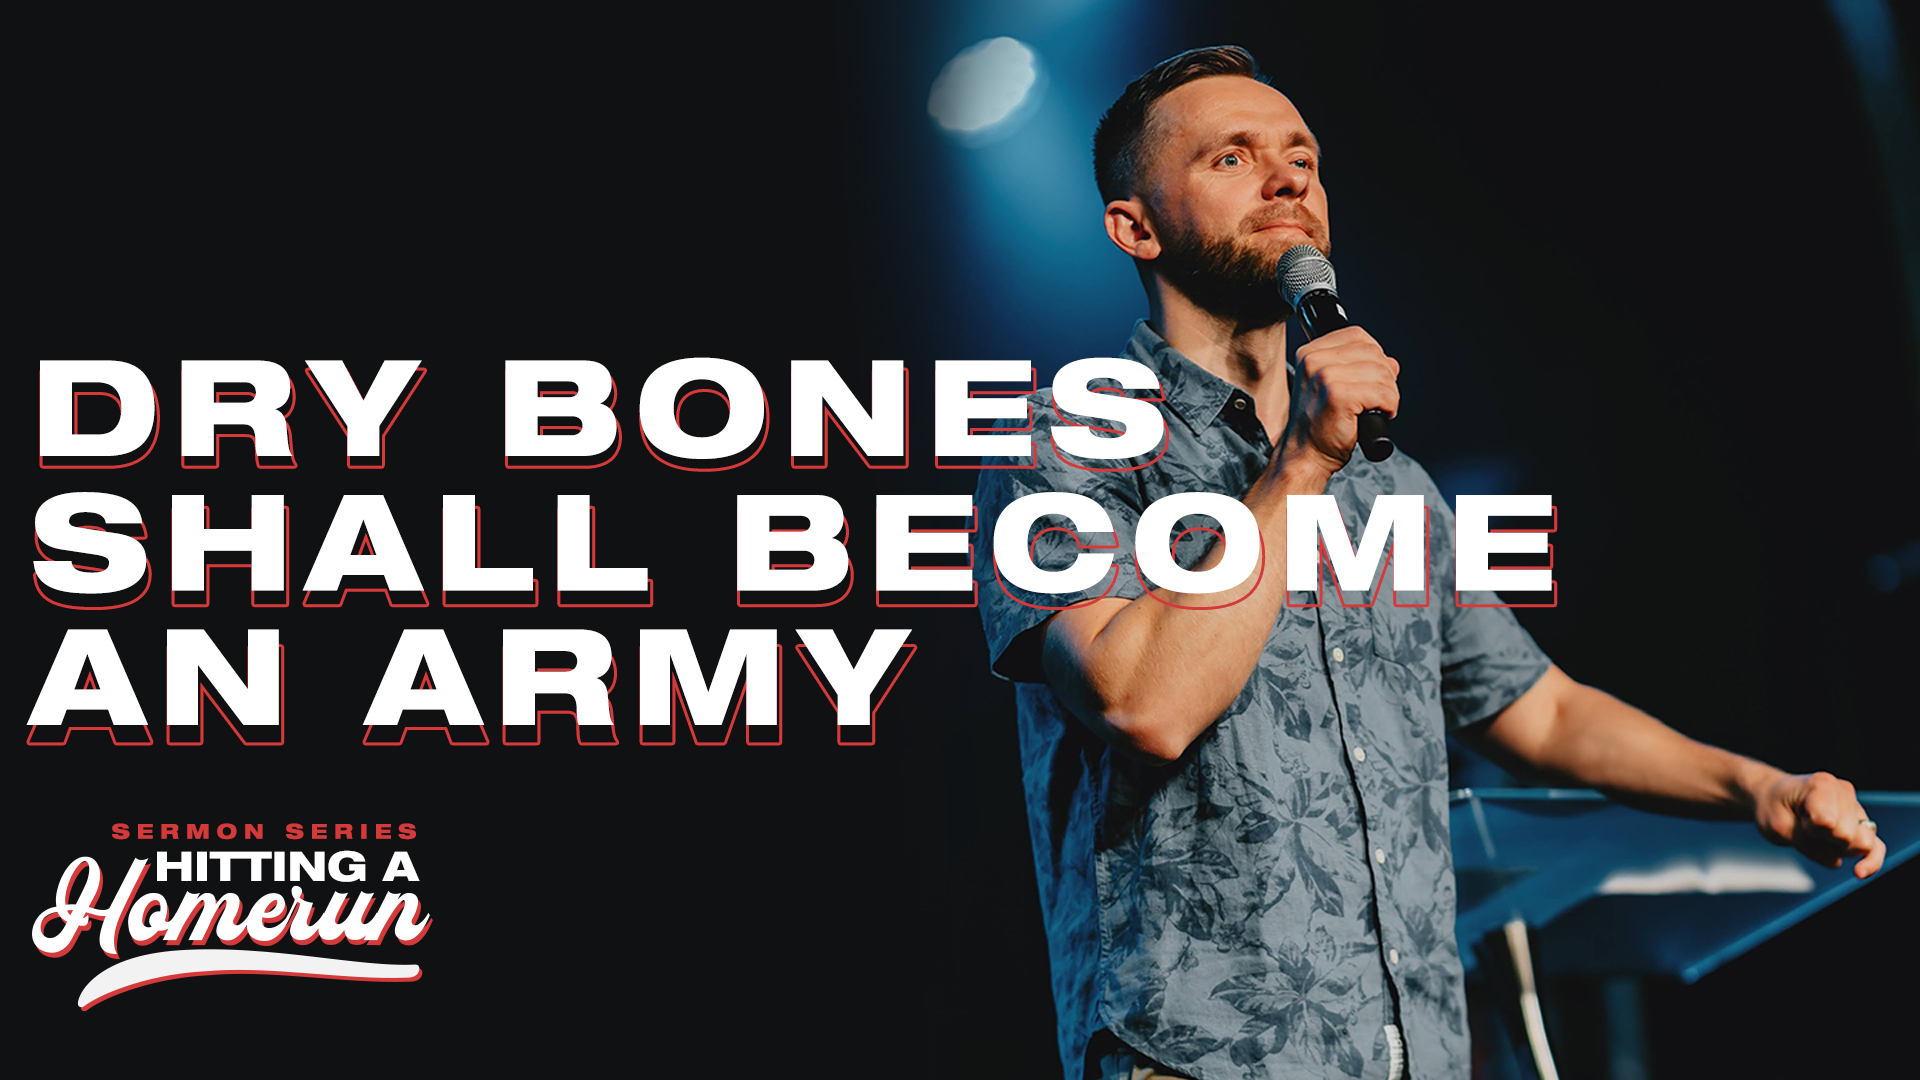 Featured image for “Dry Bones Shall Become an Army”